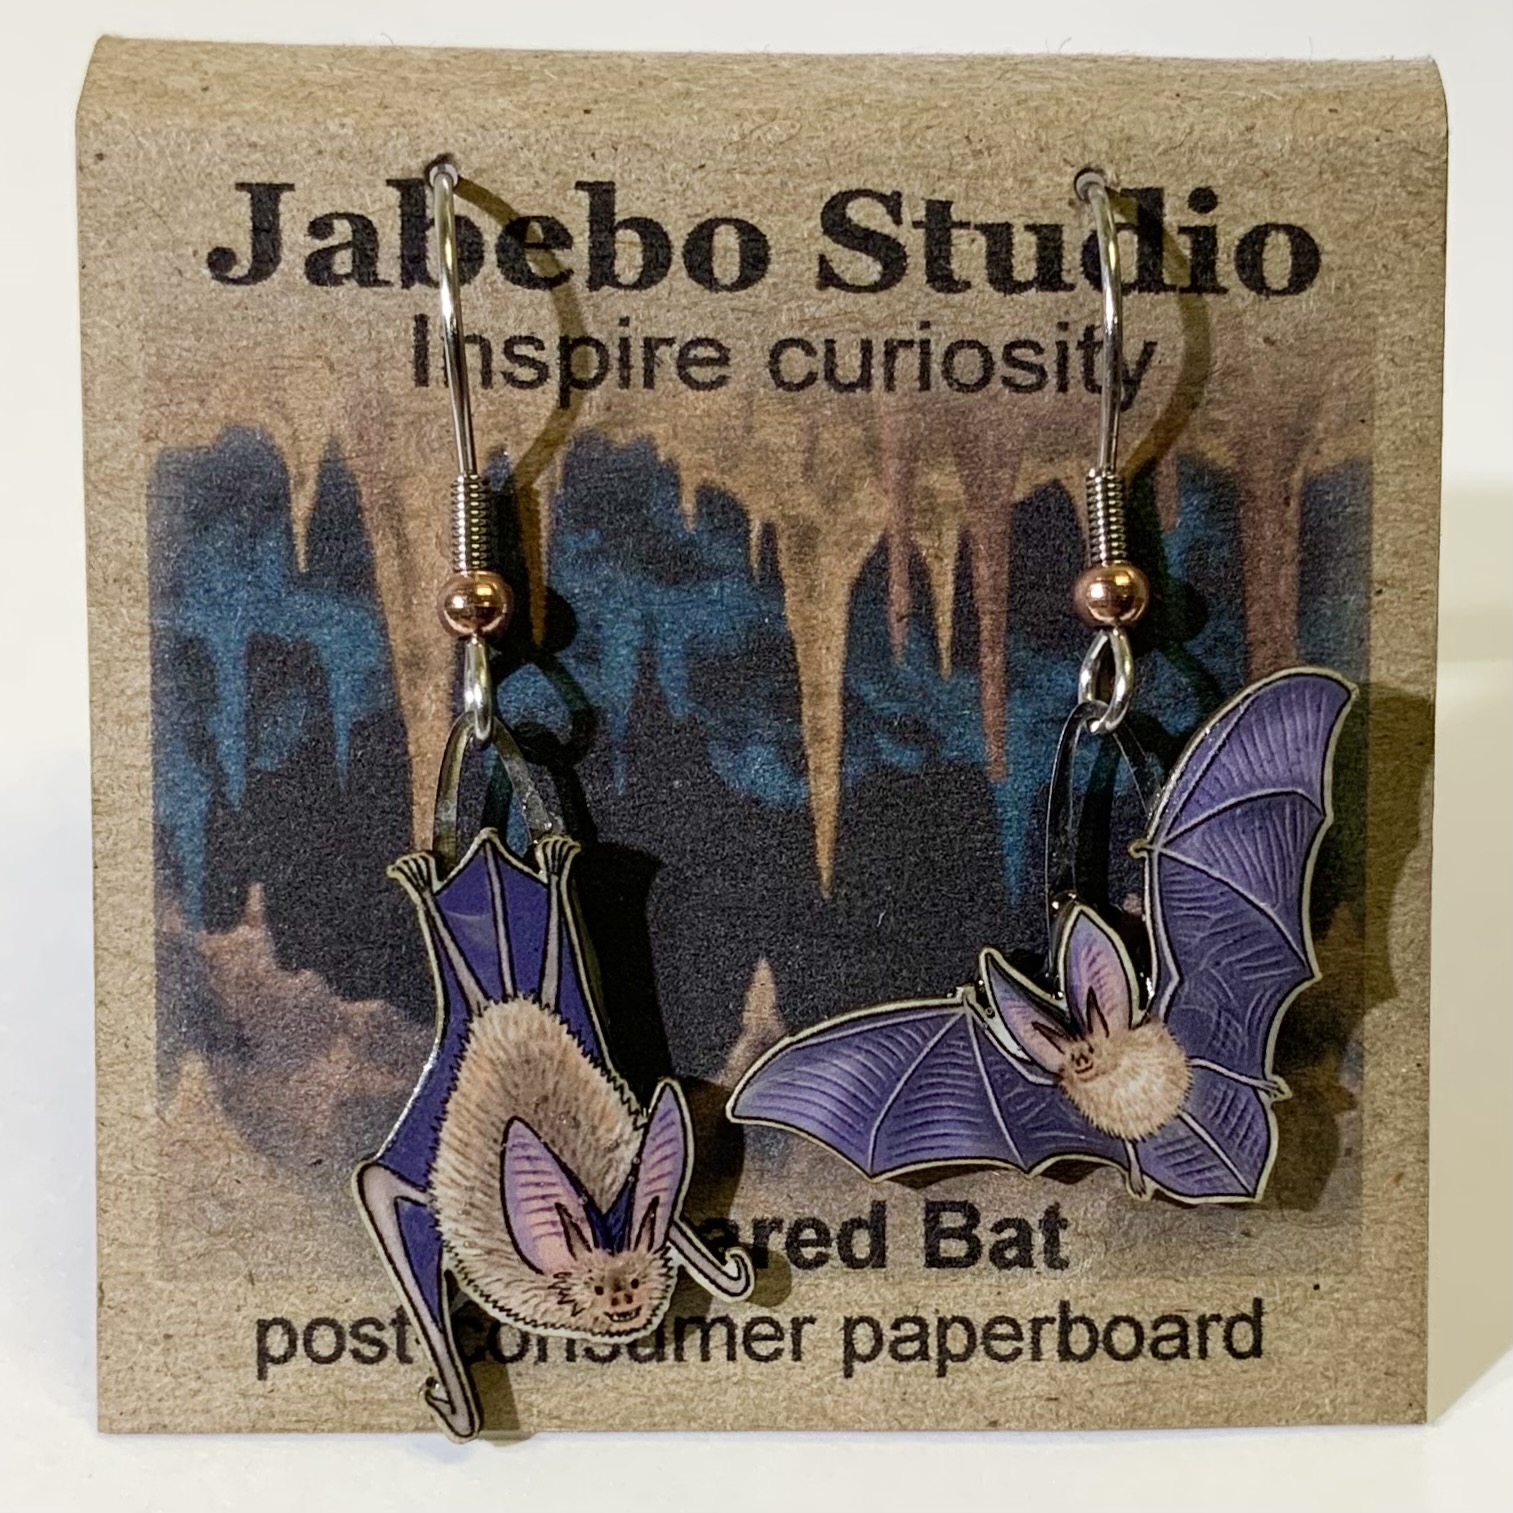 Picture shown is of 1 inch tall pair of earrings of the animal the Big-eared Bat.